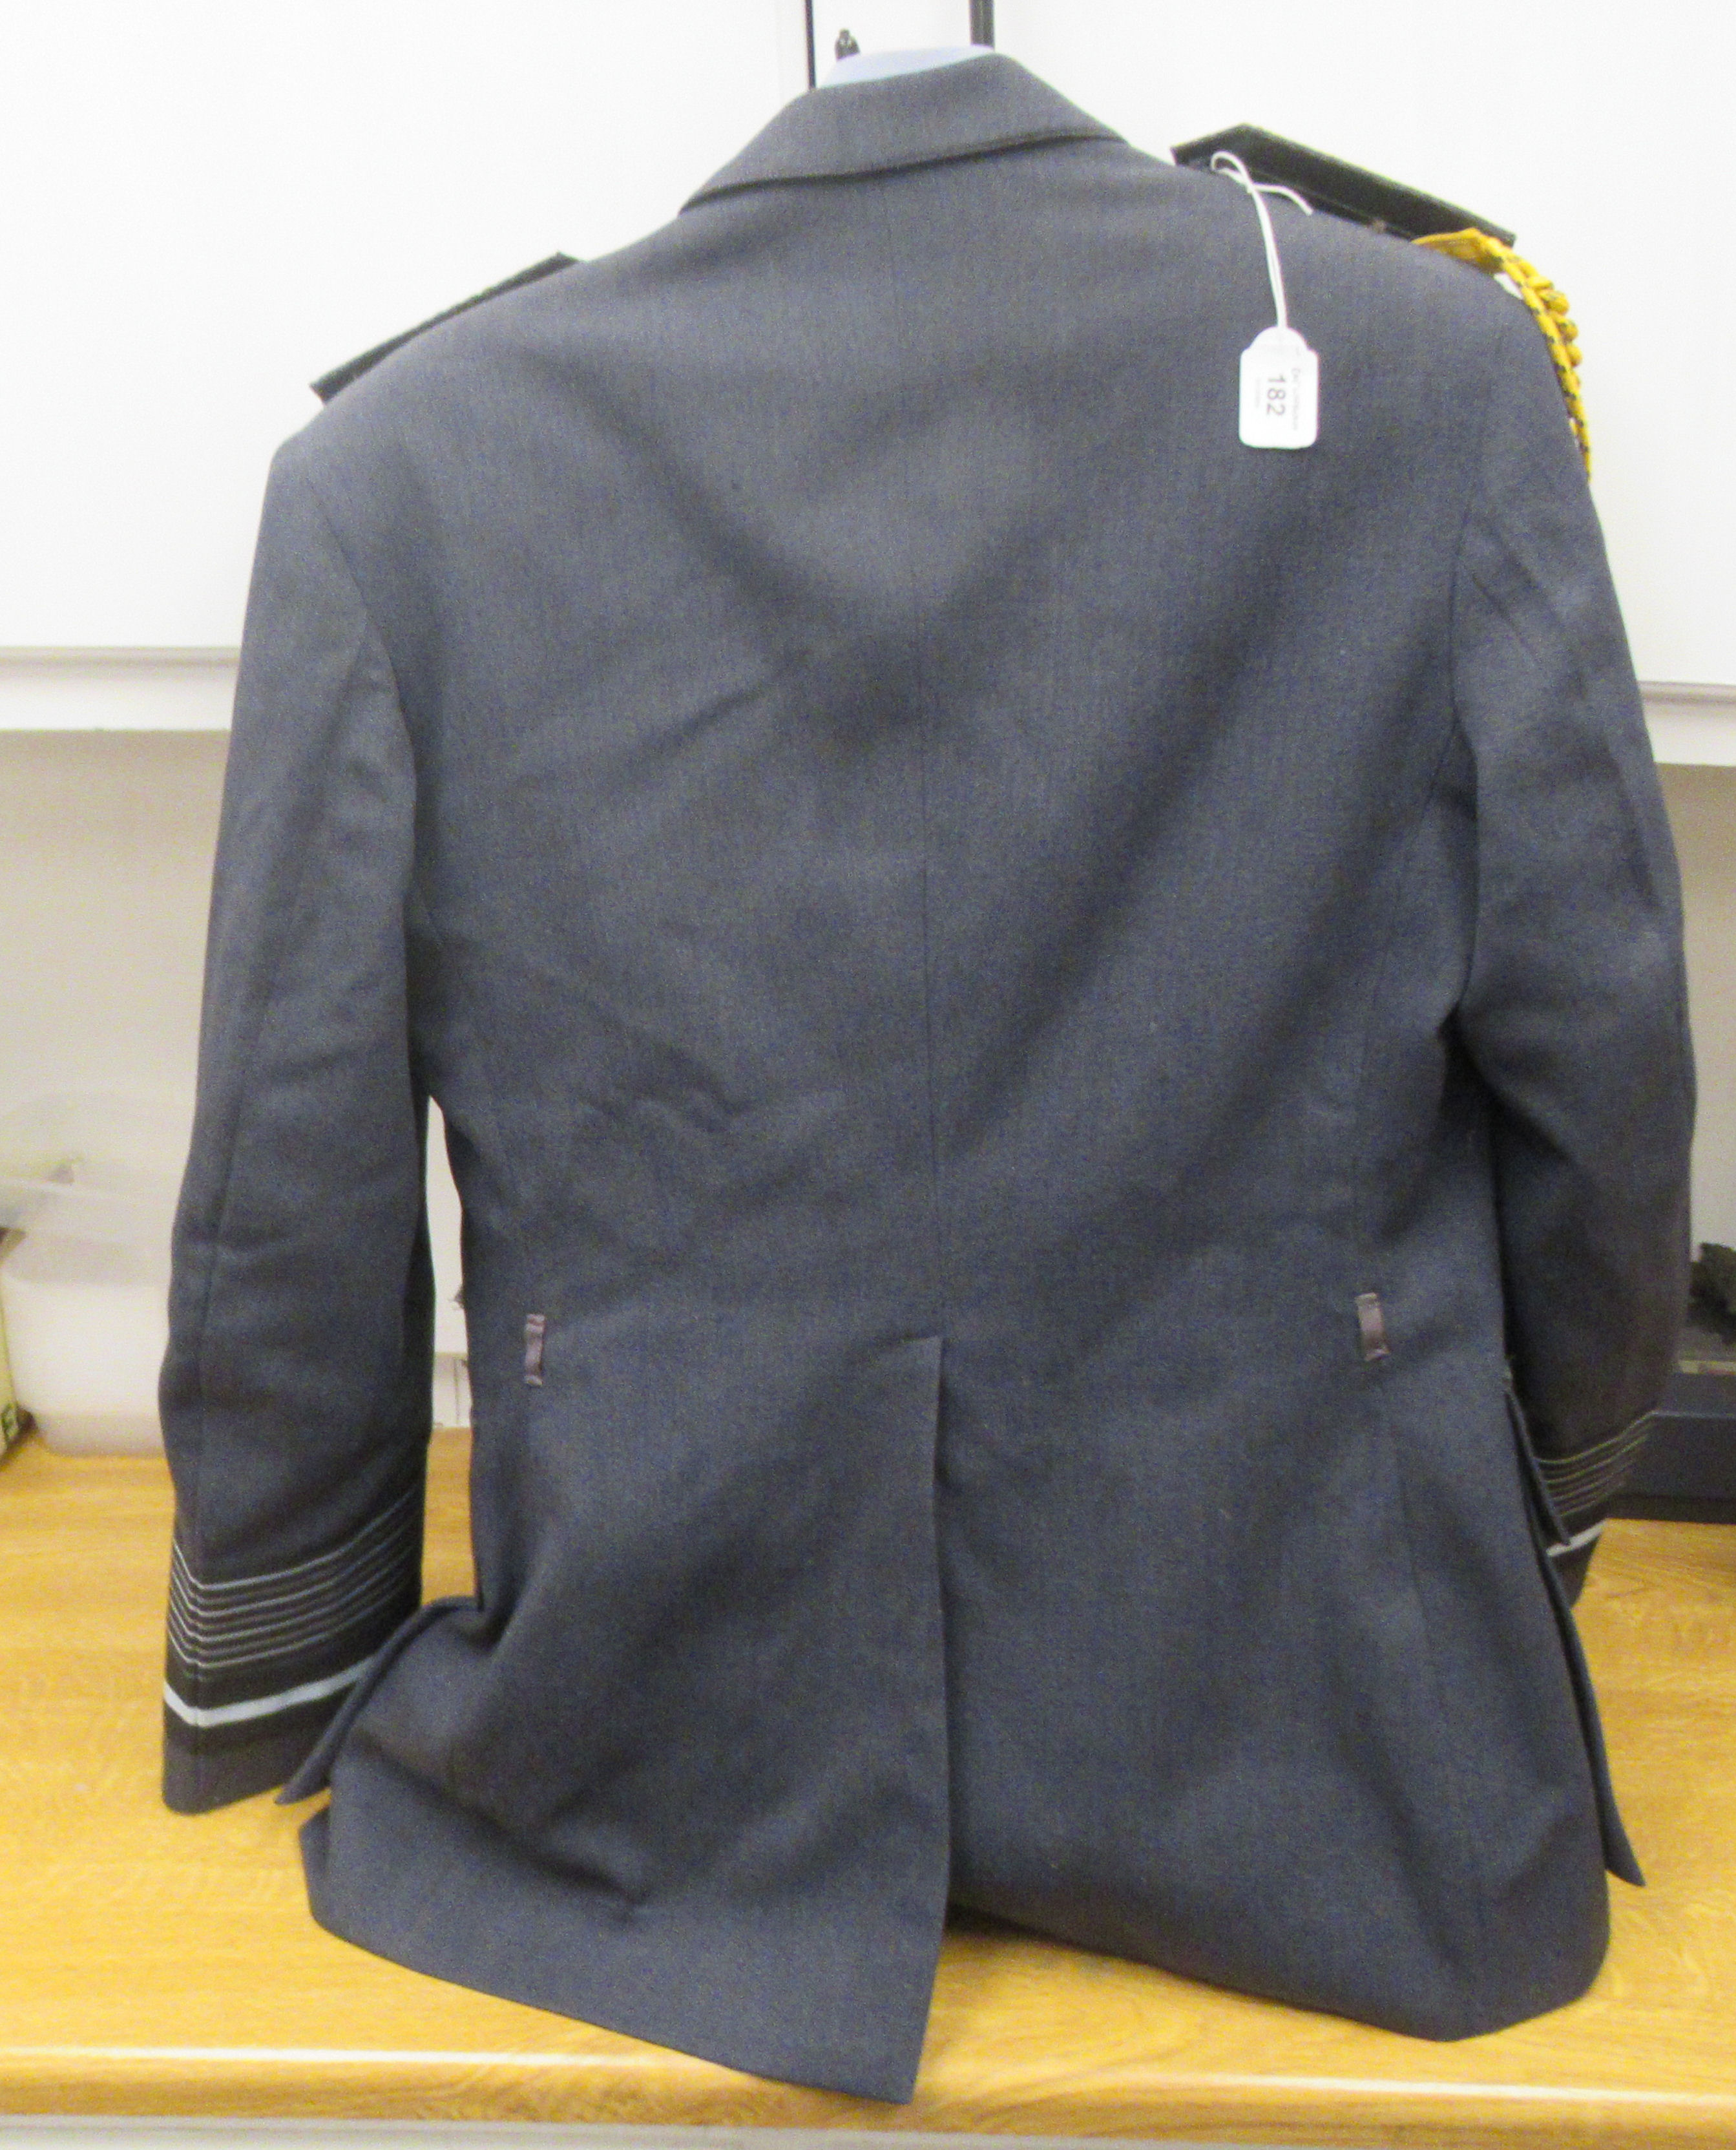 An RAF Senior Officer's uniform, comprising a tunic with medal ribbons and braided epaulettes, a - Image 3 of 12